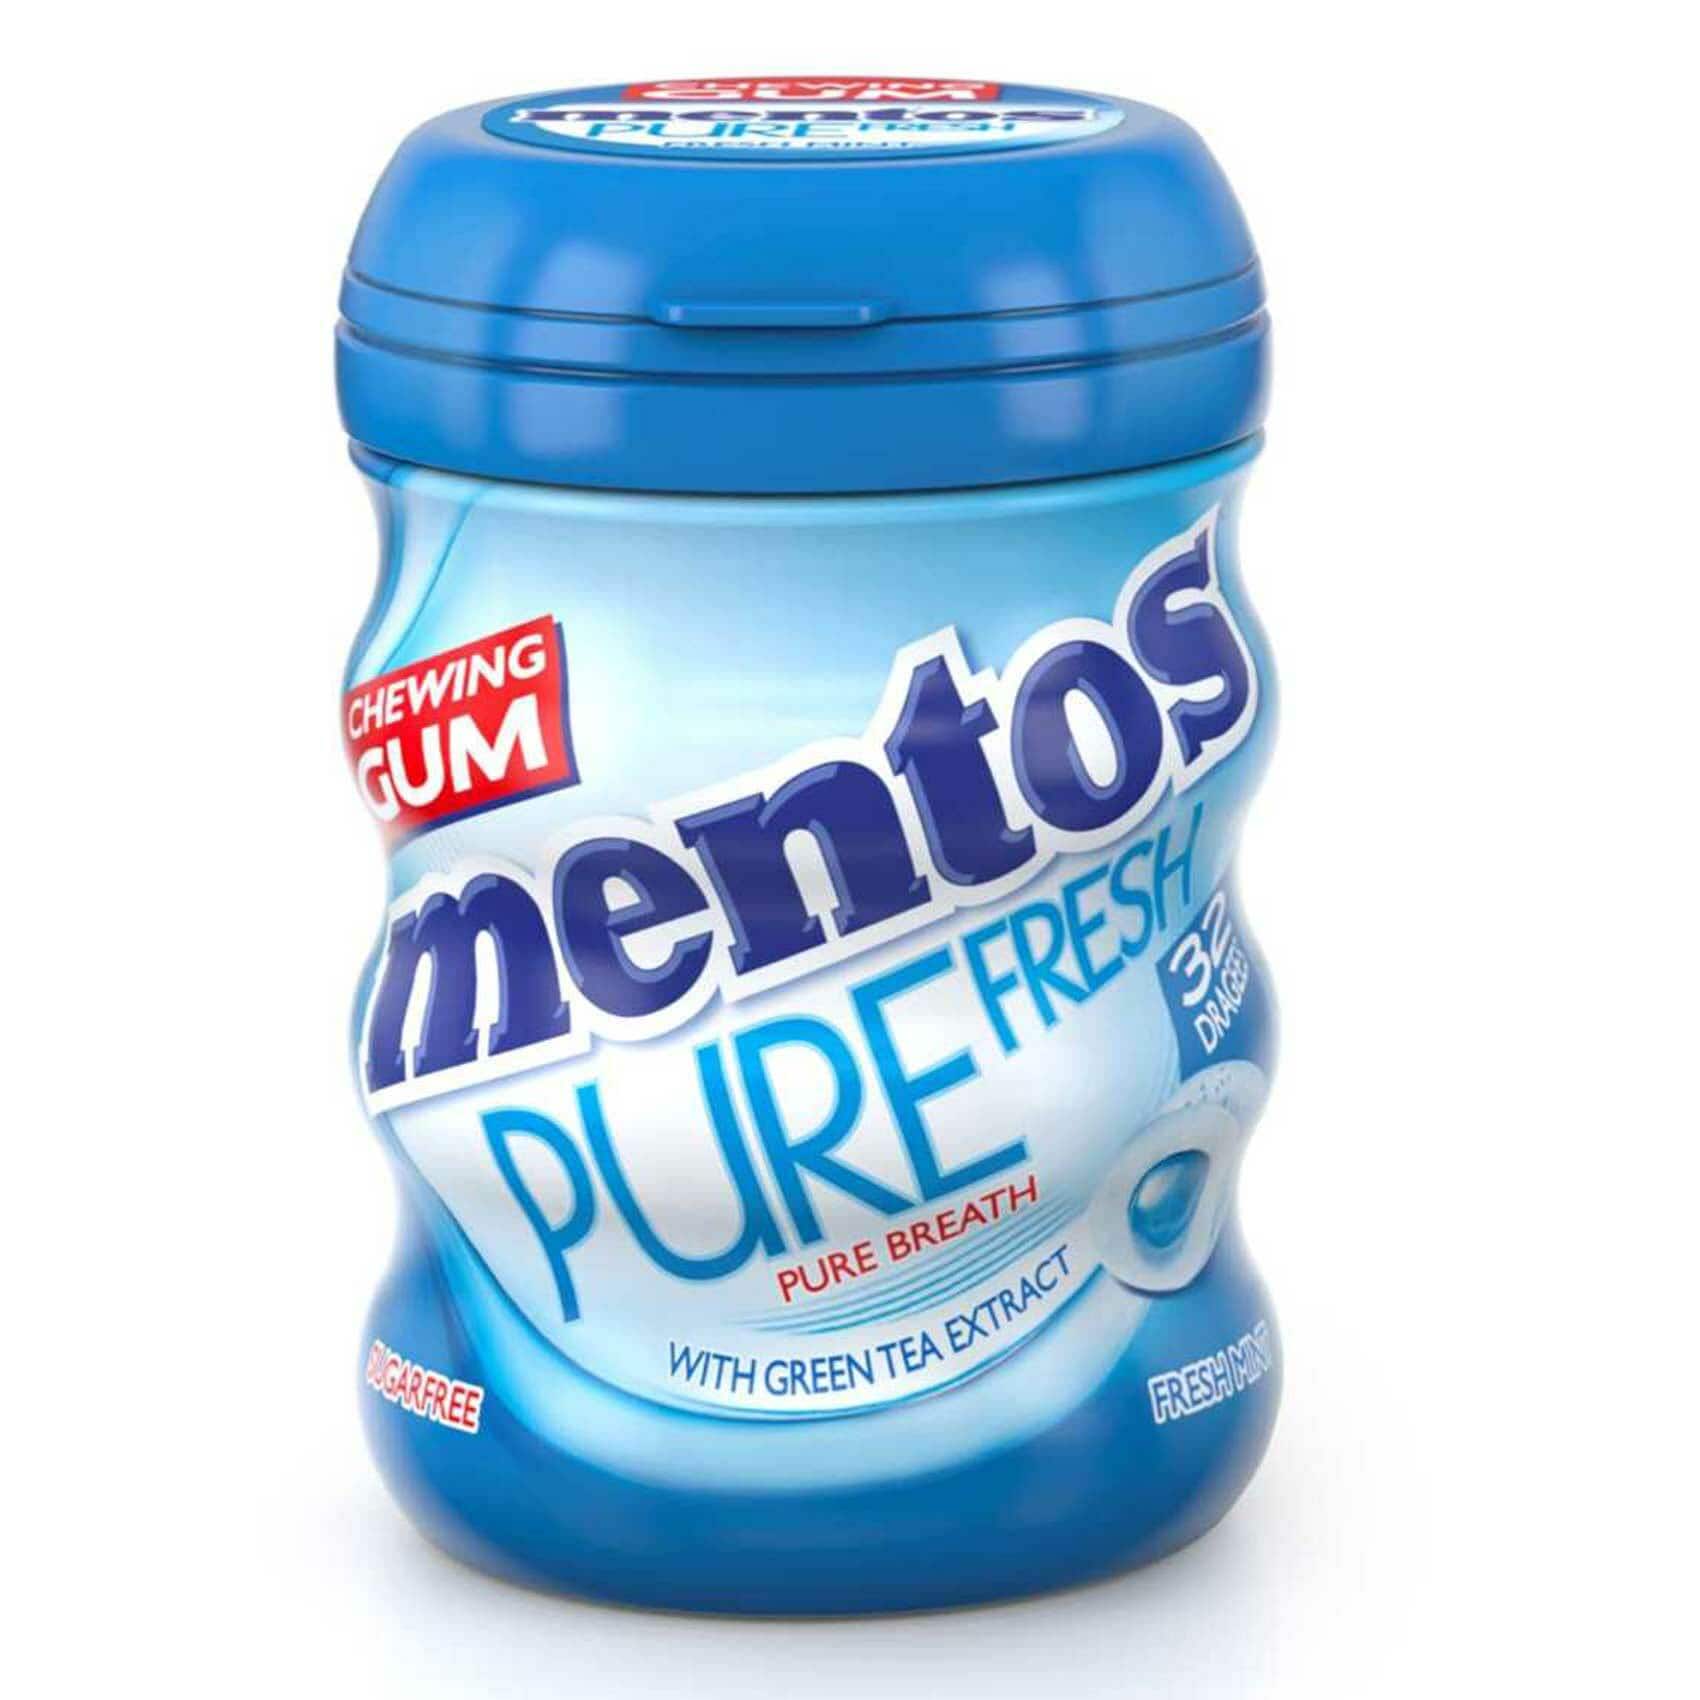 Buy Mentos Pure Fresh Mint Chewing Gum 56g Online Shop Food Cupboard On Carrefour Uae 6535